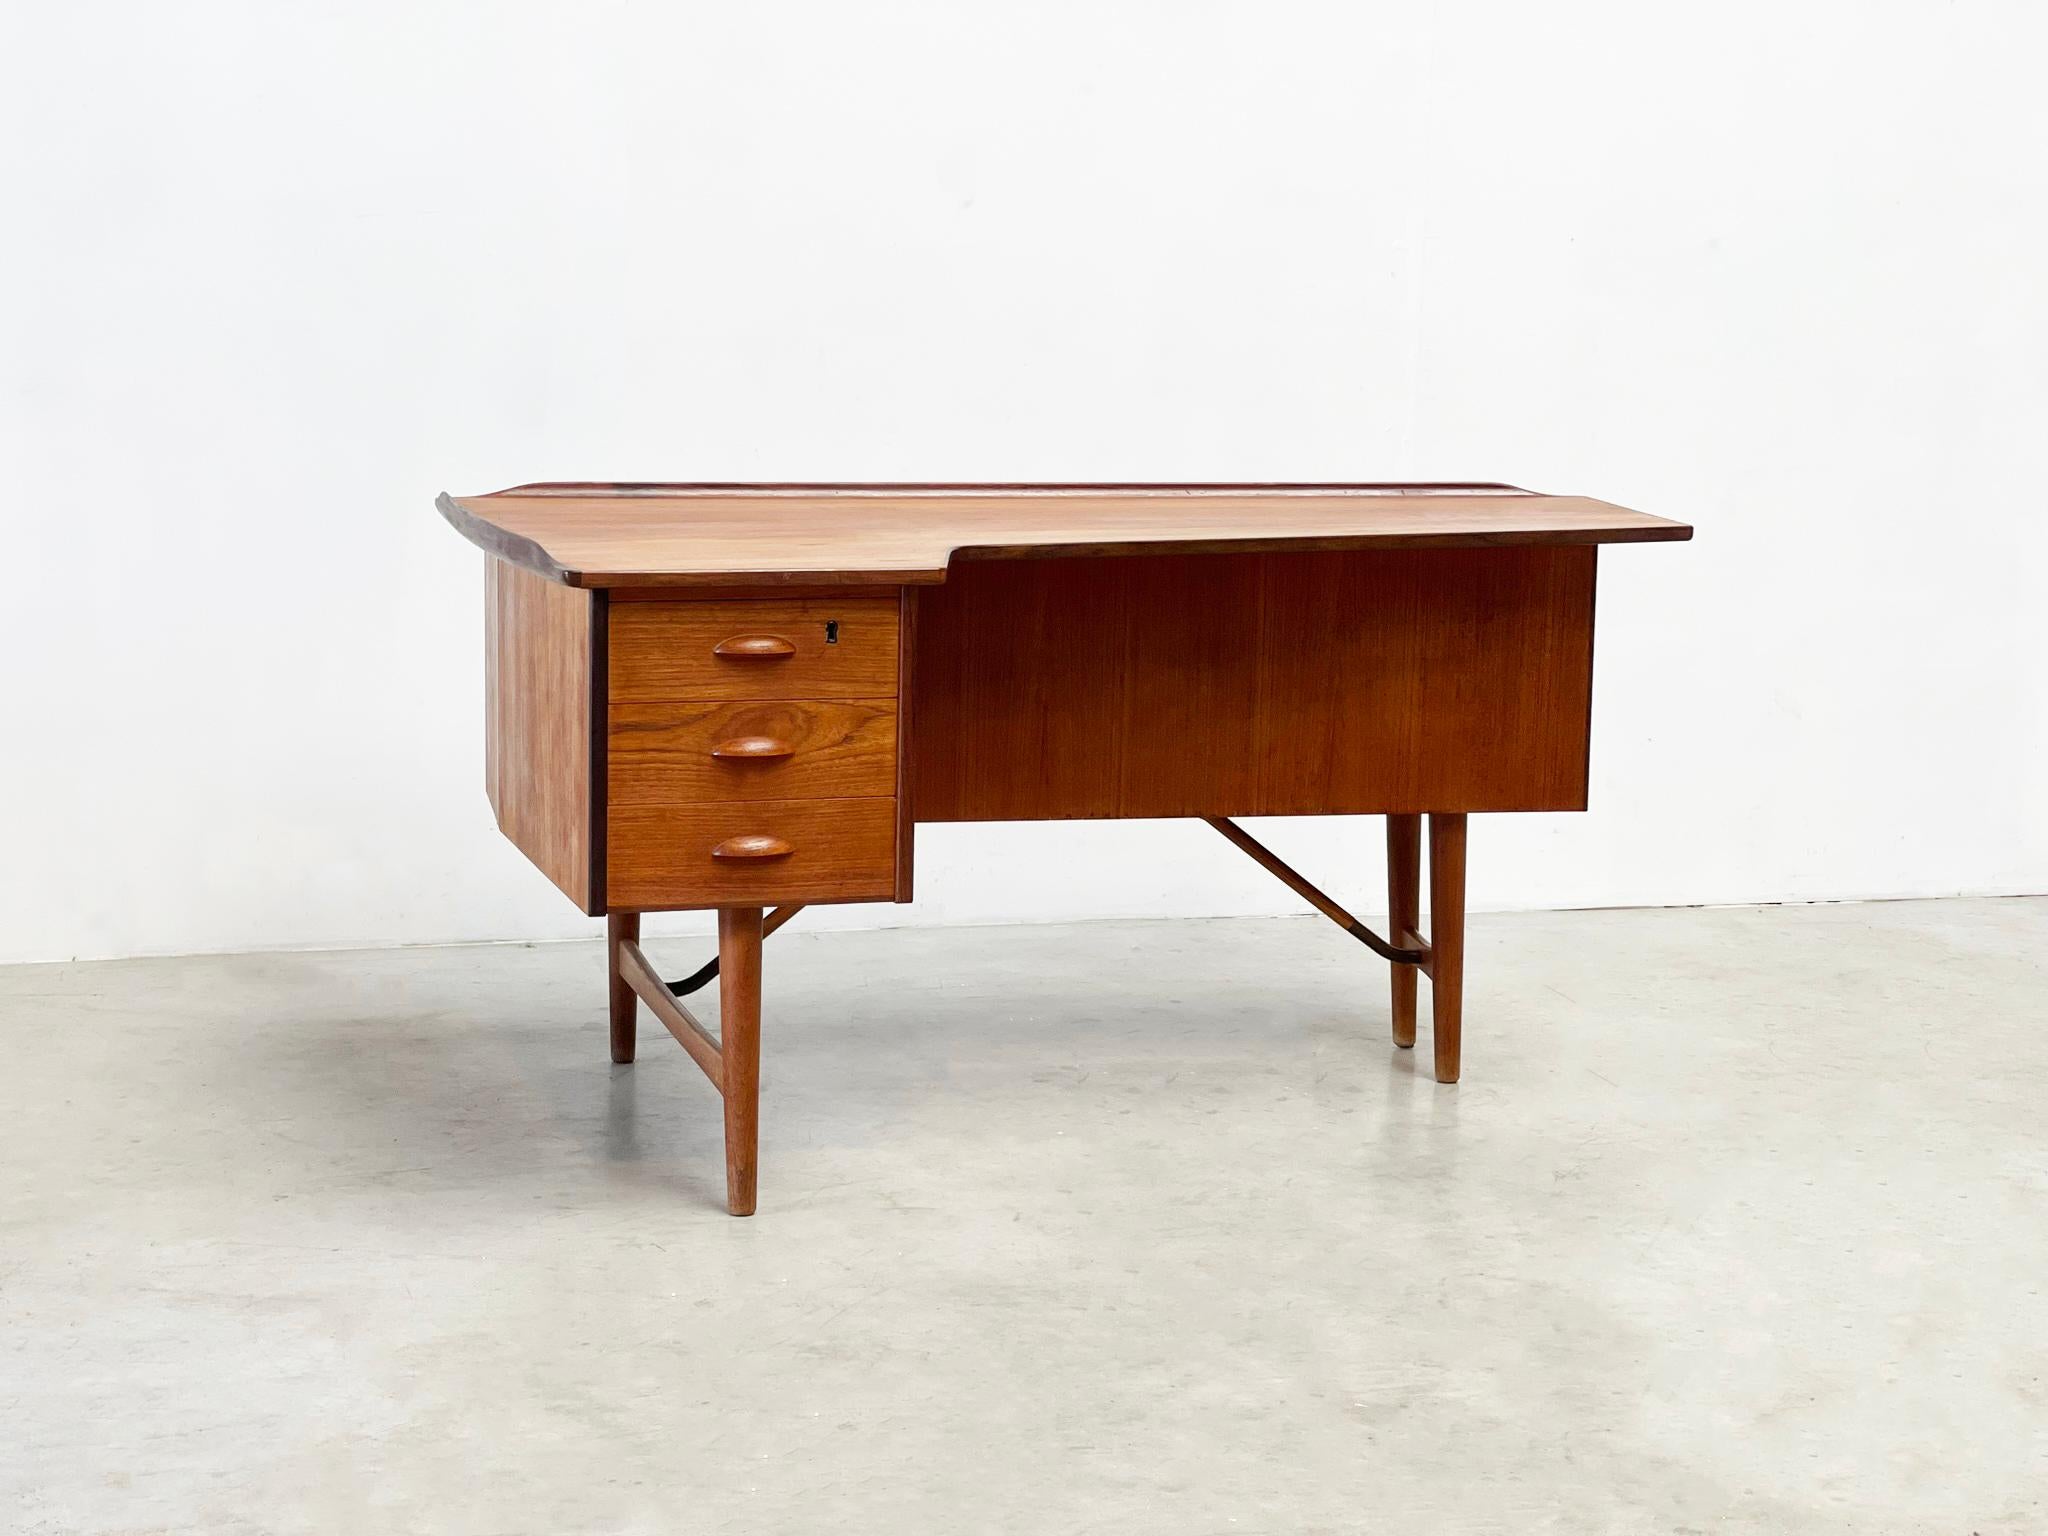 Boomerang double sided Desk by Peter Løvig Nielsen
Introducing the 1970's Boomerang Desk by Peter Løvig Nielsen, crafted with precision in Denmark by Hedensted Møbelfabrik. Elevate your workspace with its sleek design and premium craftsmanship.